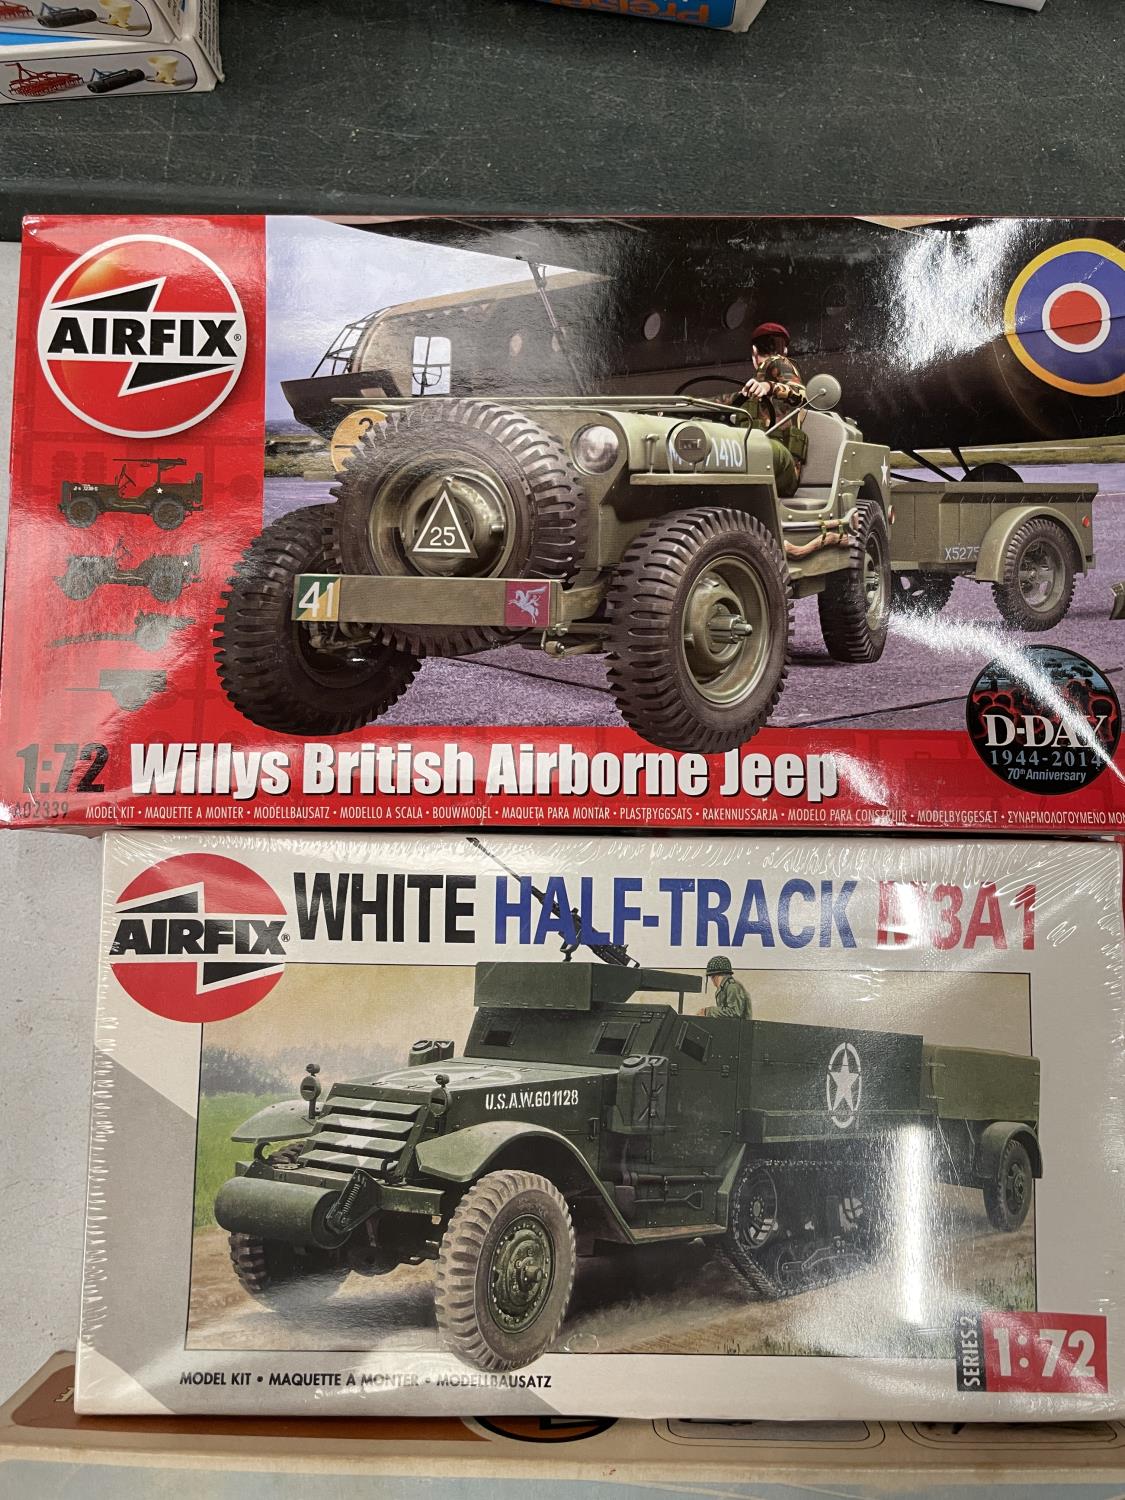 TEN BOXED AIRFIX MILITARY VEHICLE AND AIRPLANE KITS - Image 2 of 6